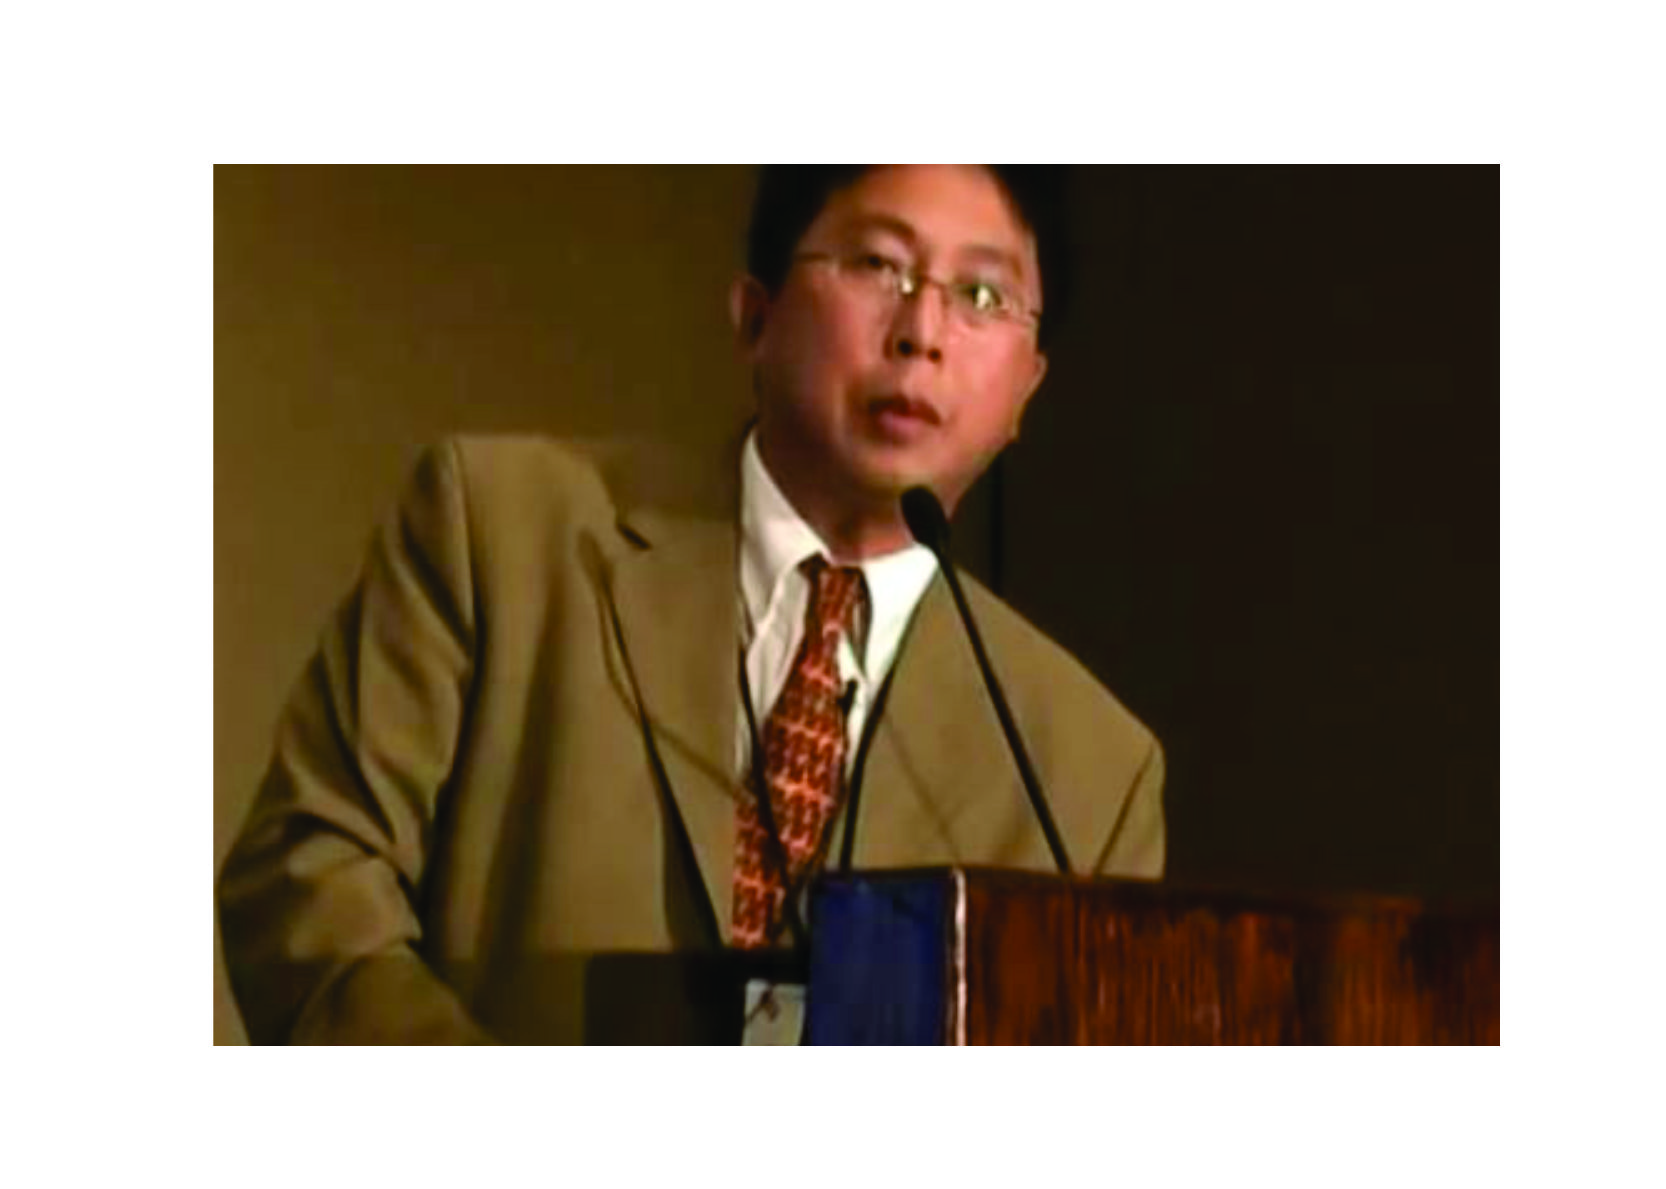 Dr. Willie Soon versus the climate apocalypse